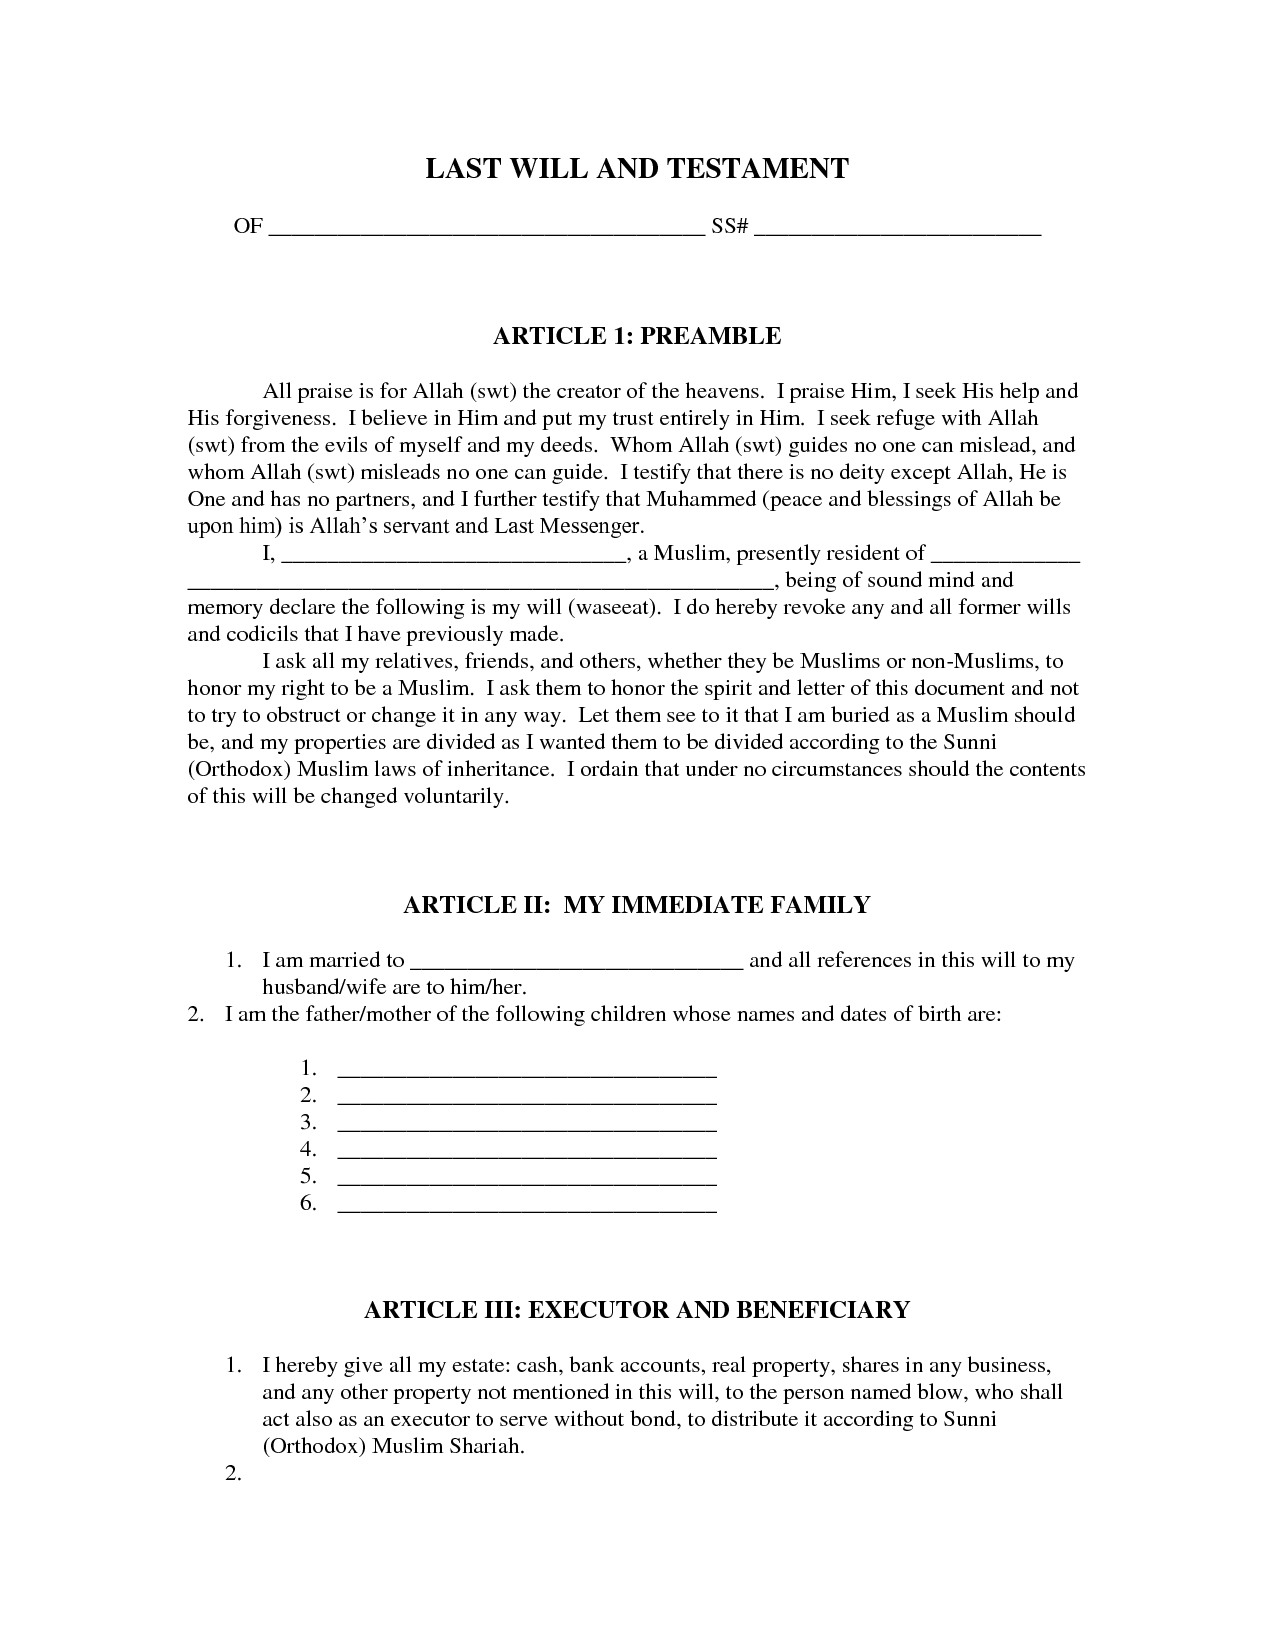 Sample Will - Free Printable Documents